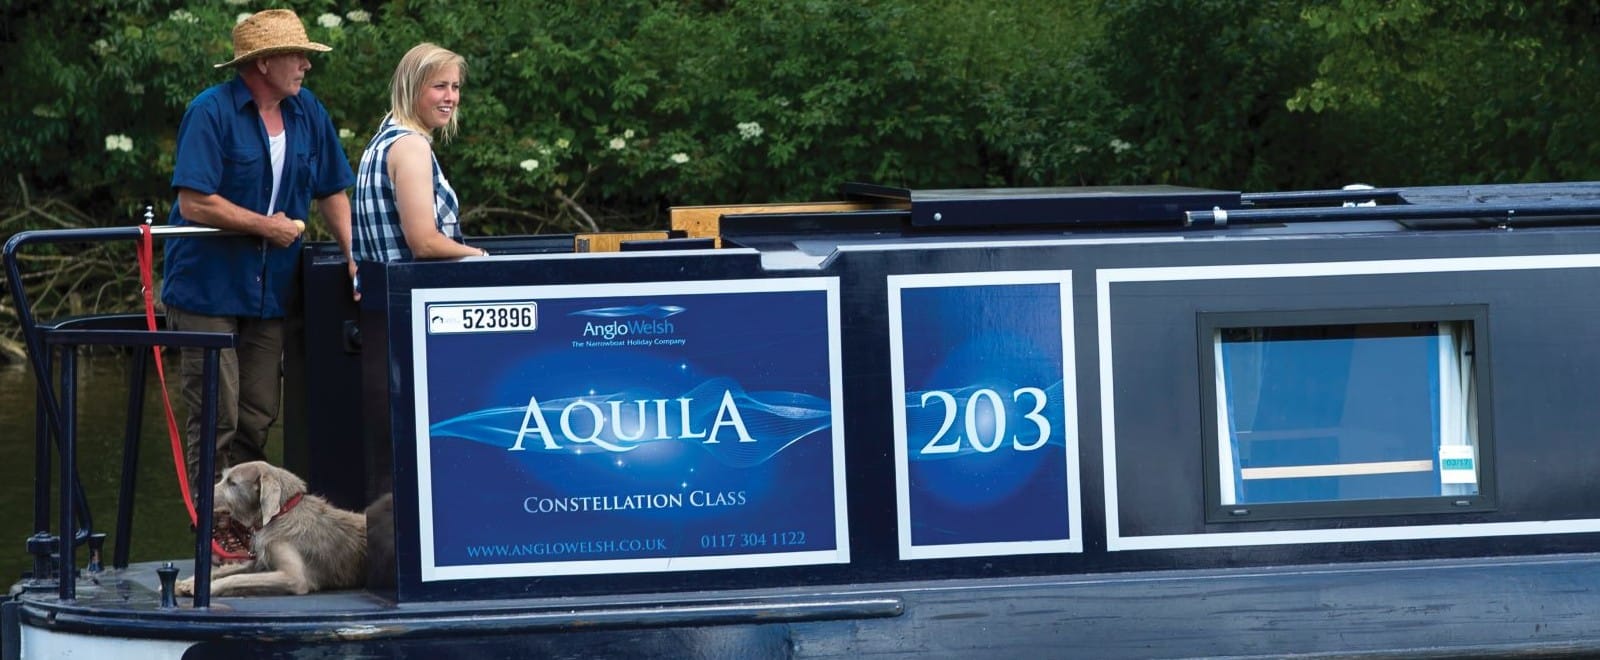 Aquila Constellation Class luxury narrowboat for hire